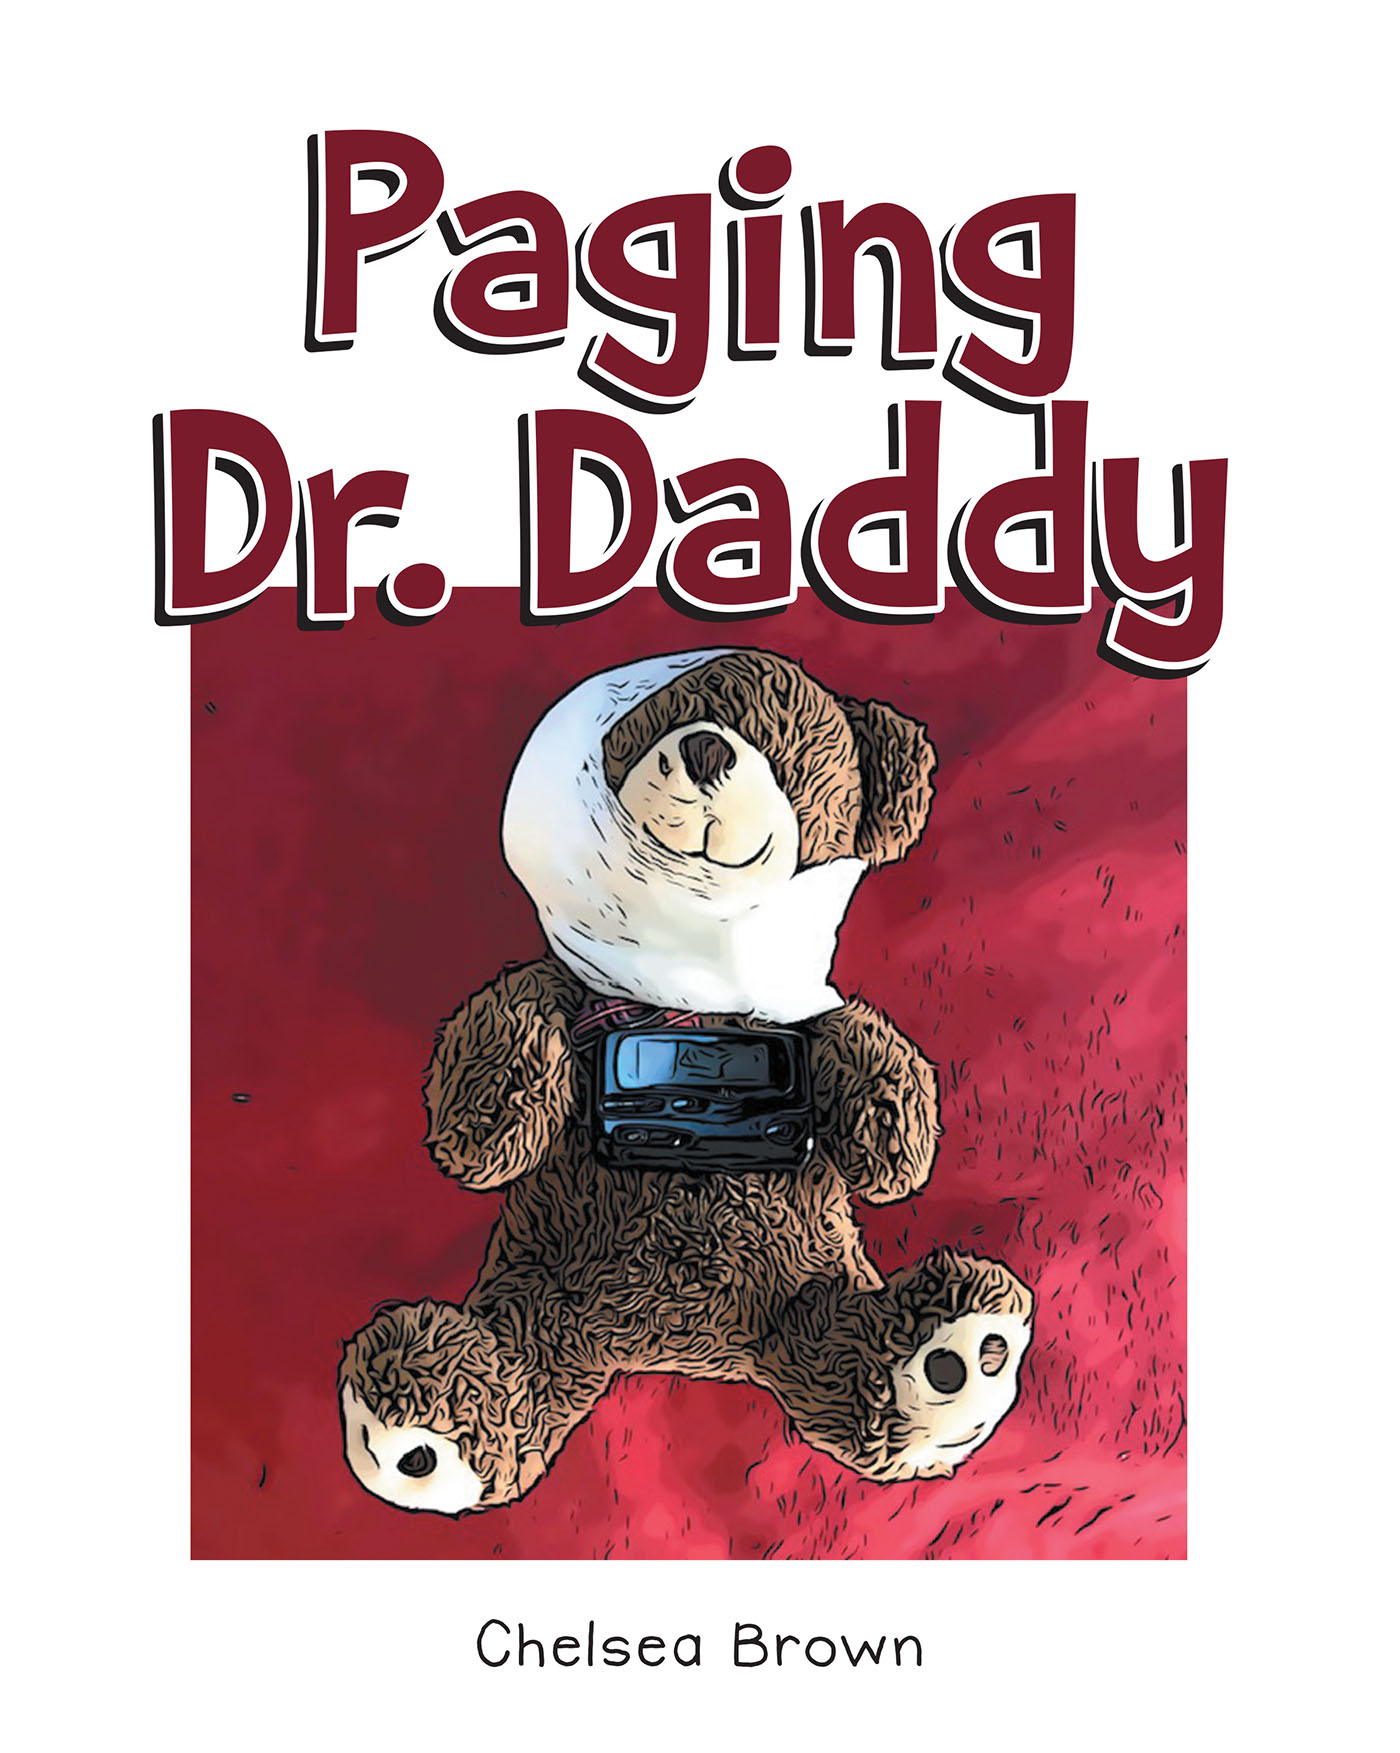 Author Chelsea Brown’s New Book, "Paging Dr. Daddy," Follows a Young Girl Who Needs Her Dad to Help Save Her Dearest Friend After Discovering Him Injured One Day